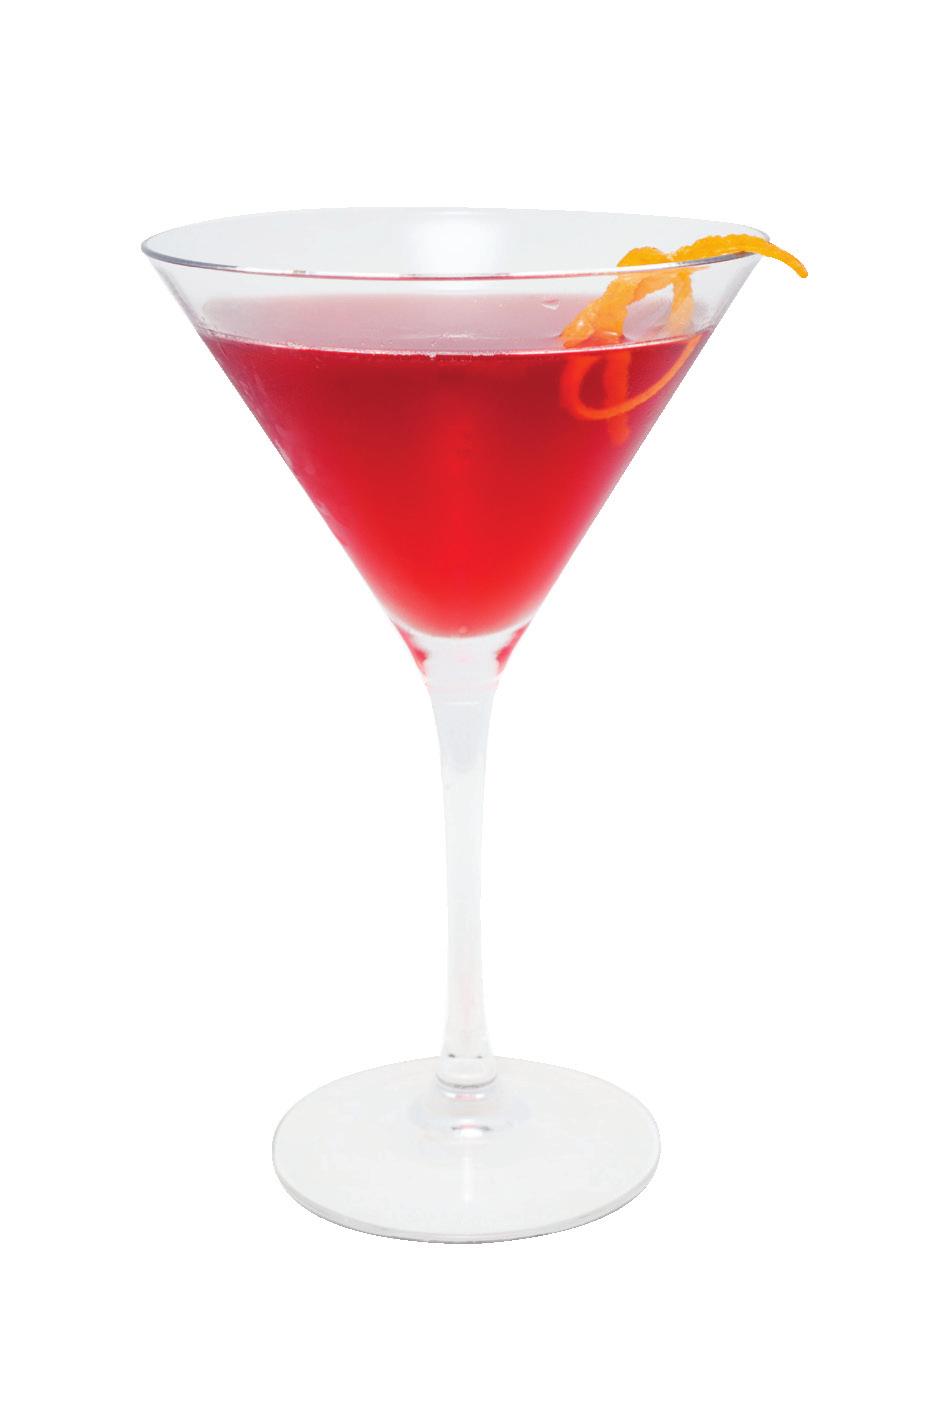 Glamour & Nostalgia 1cl Apricot Brandy 1cl Lime Cordial Cranberry Juice to top and ice cubes Mix